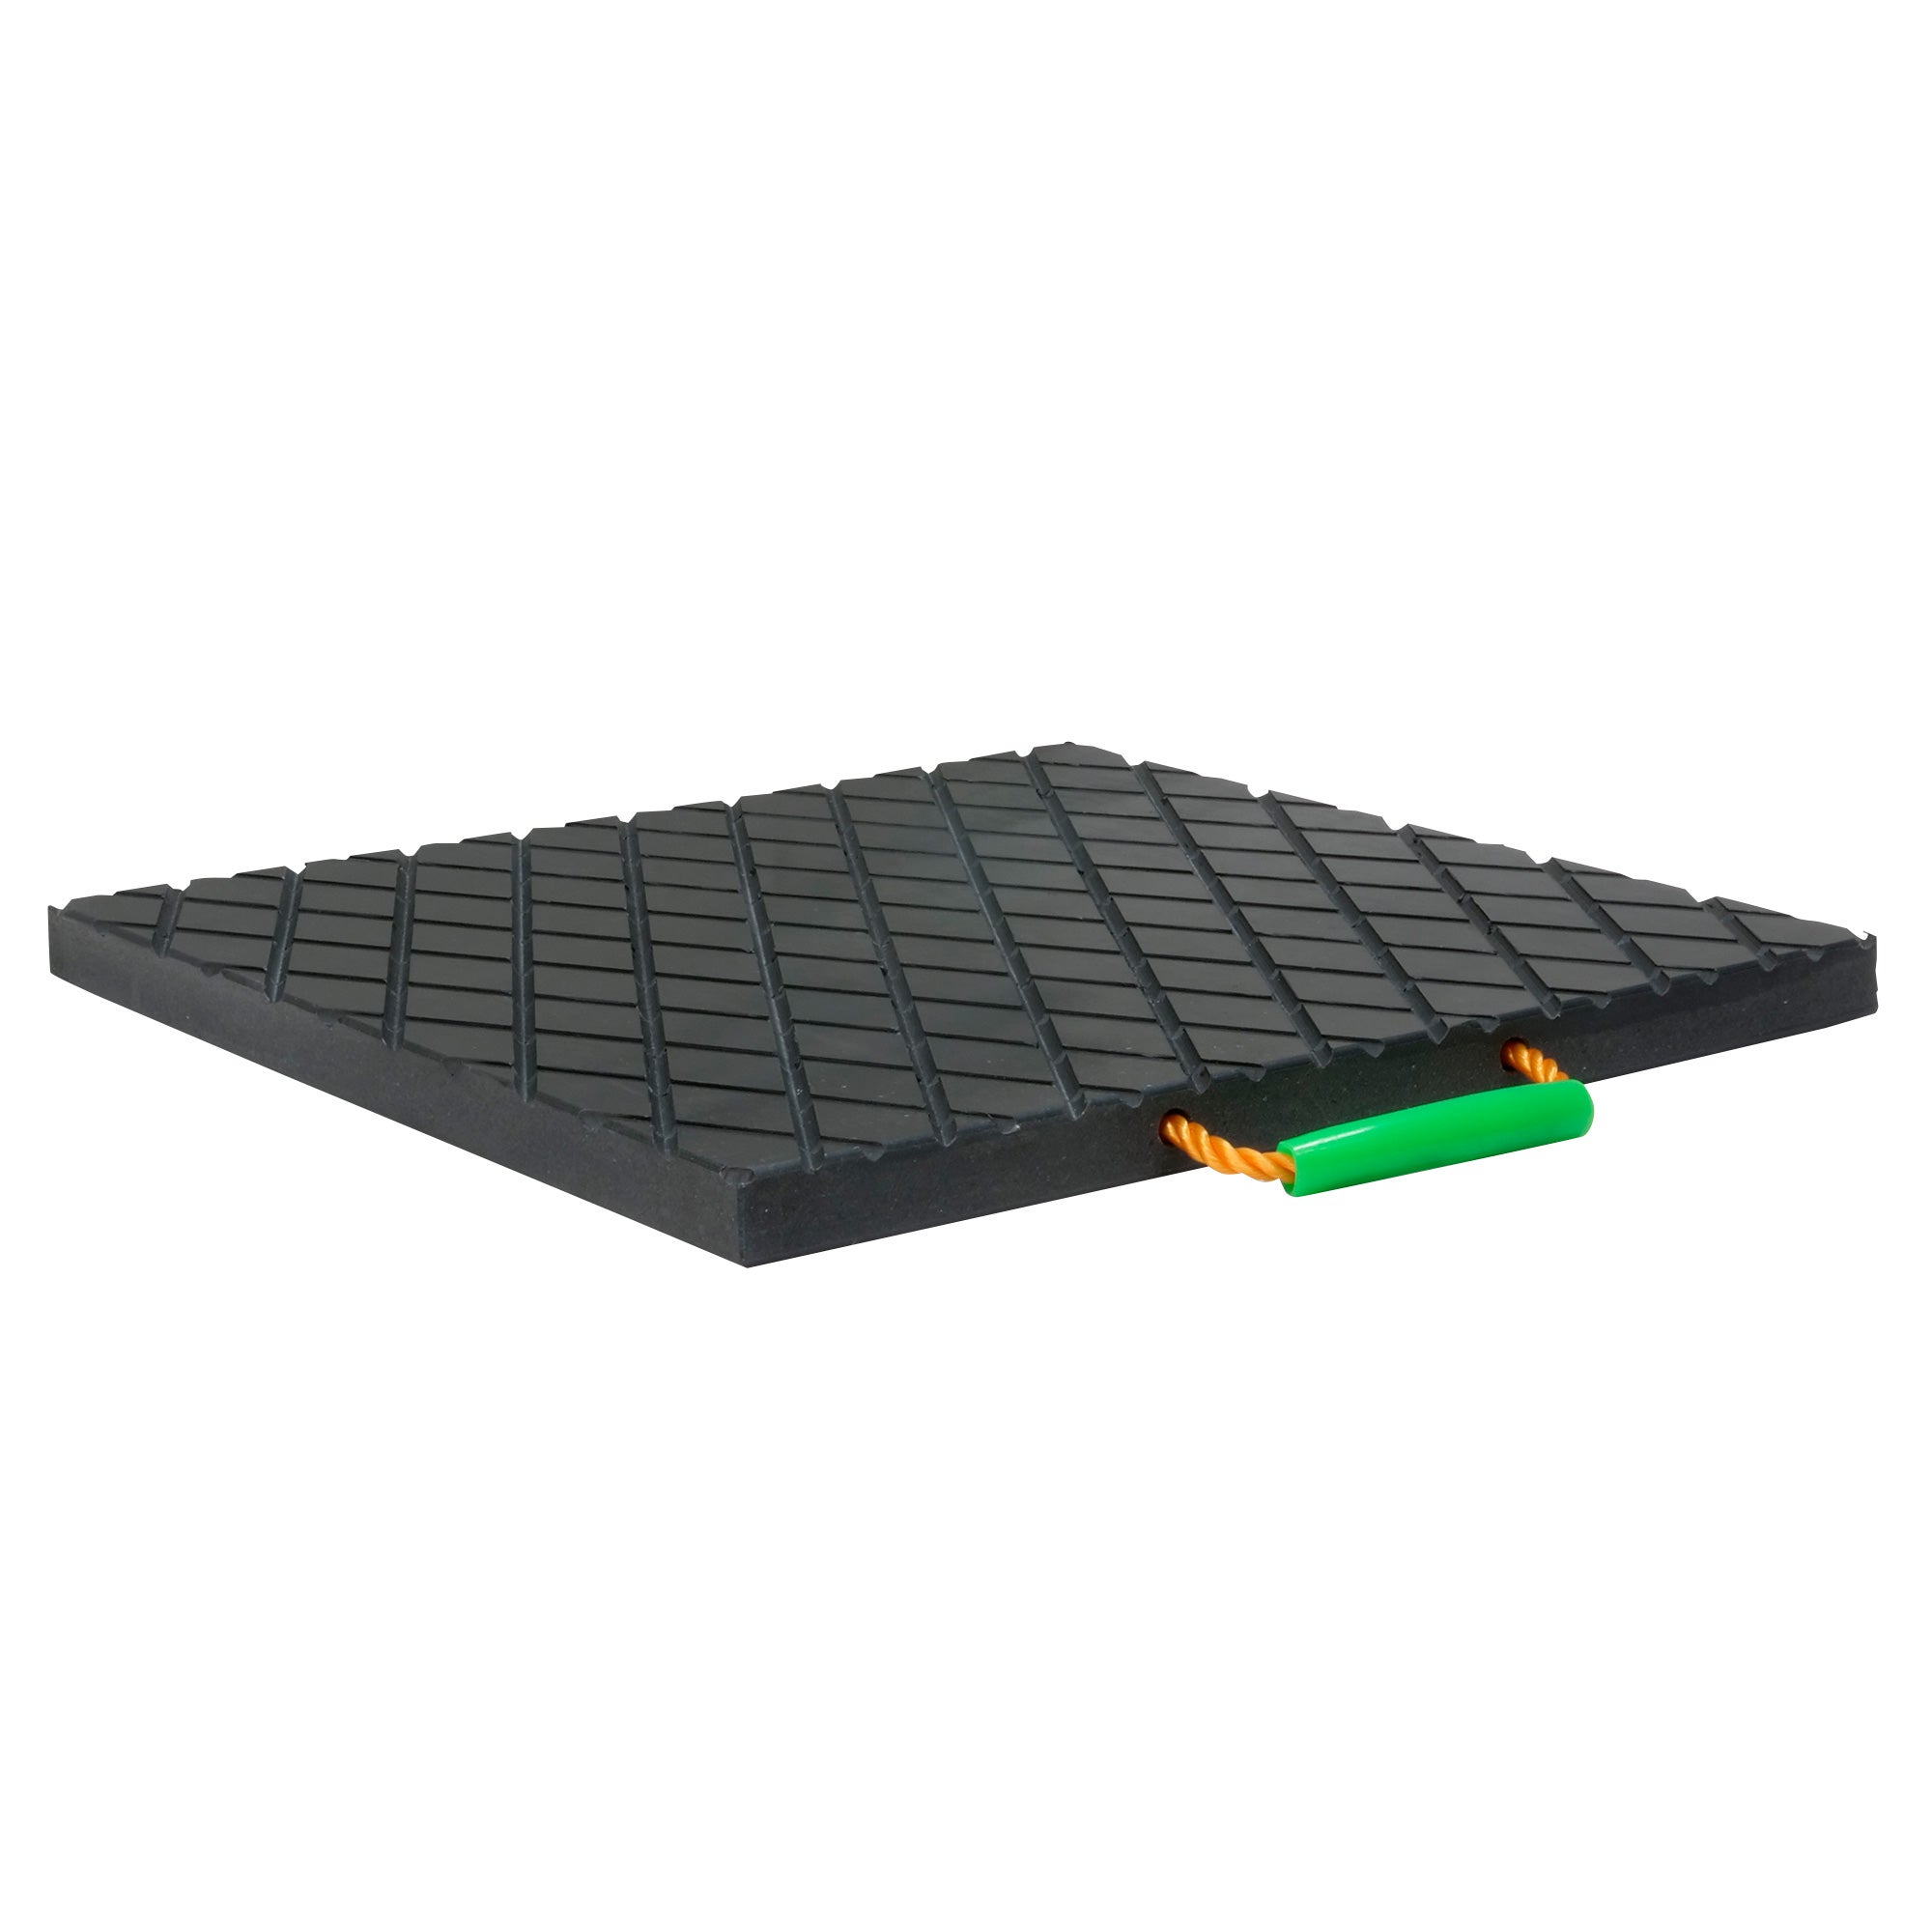 Professional Outrigger Pad for The Crane